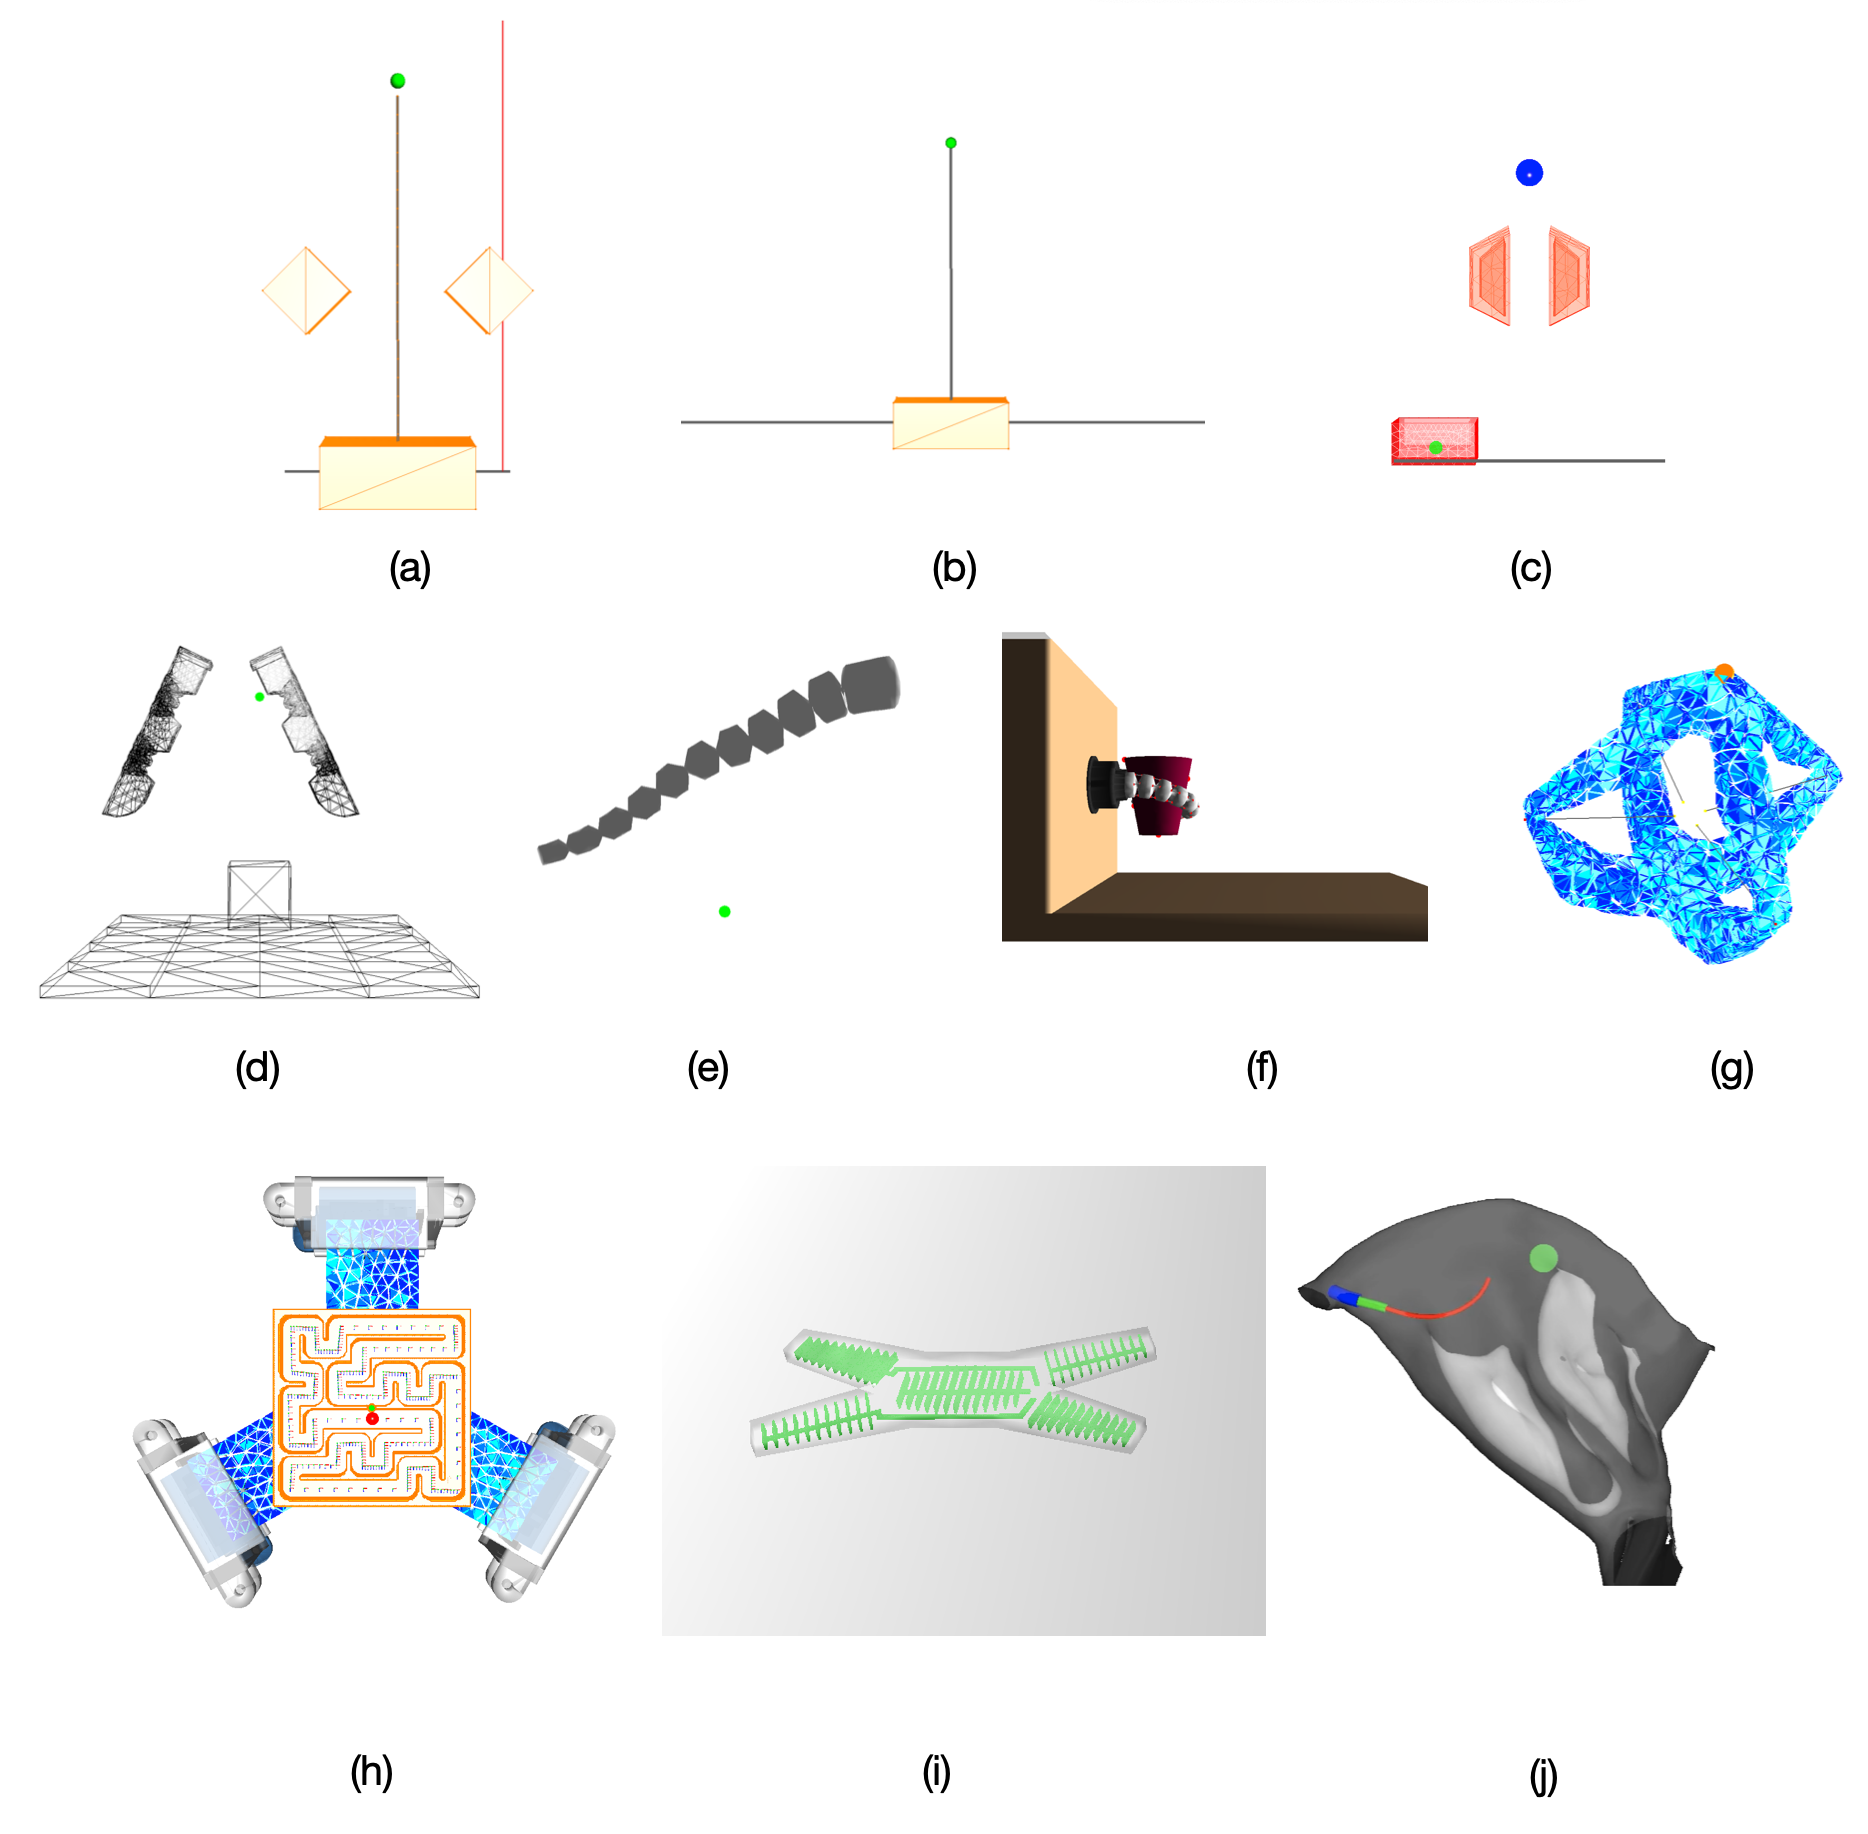 Various images showing simulation results.